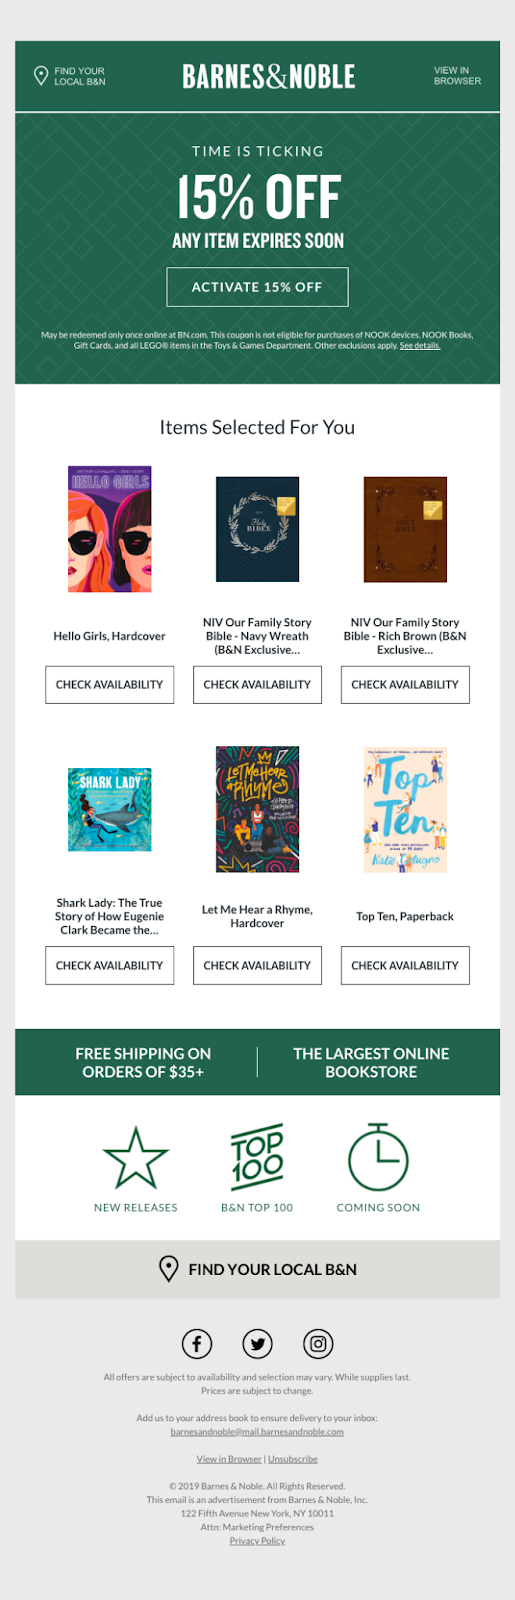 Barnes and Noble's email offering 15% off and suggesting the items for the user